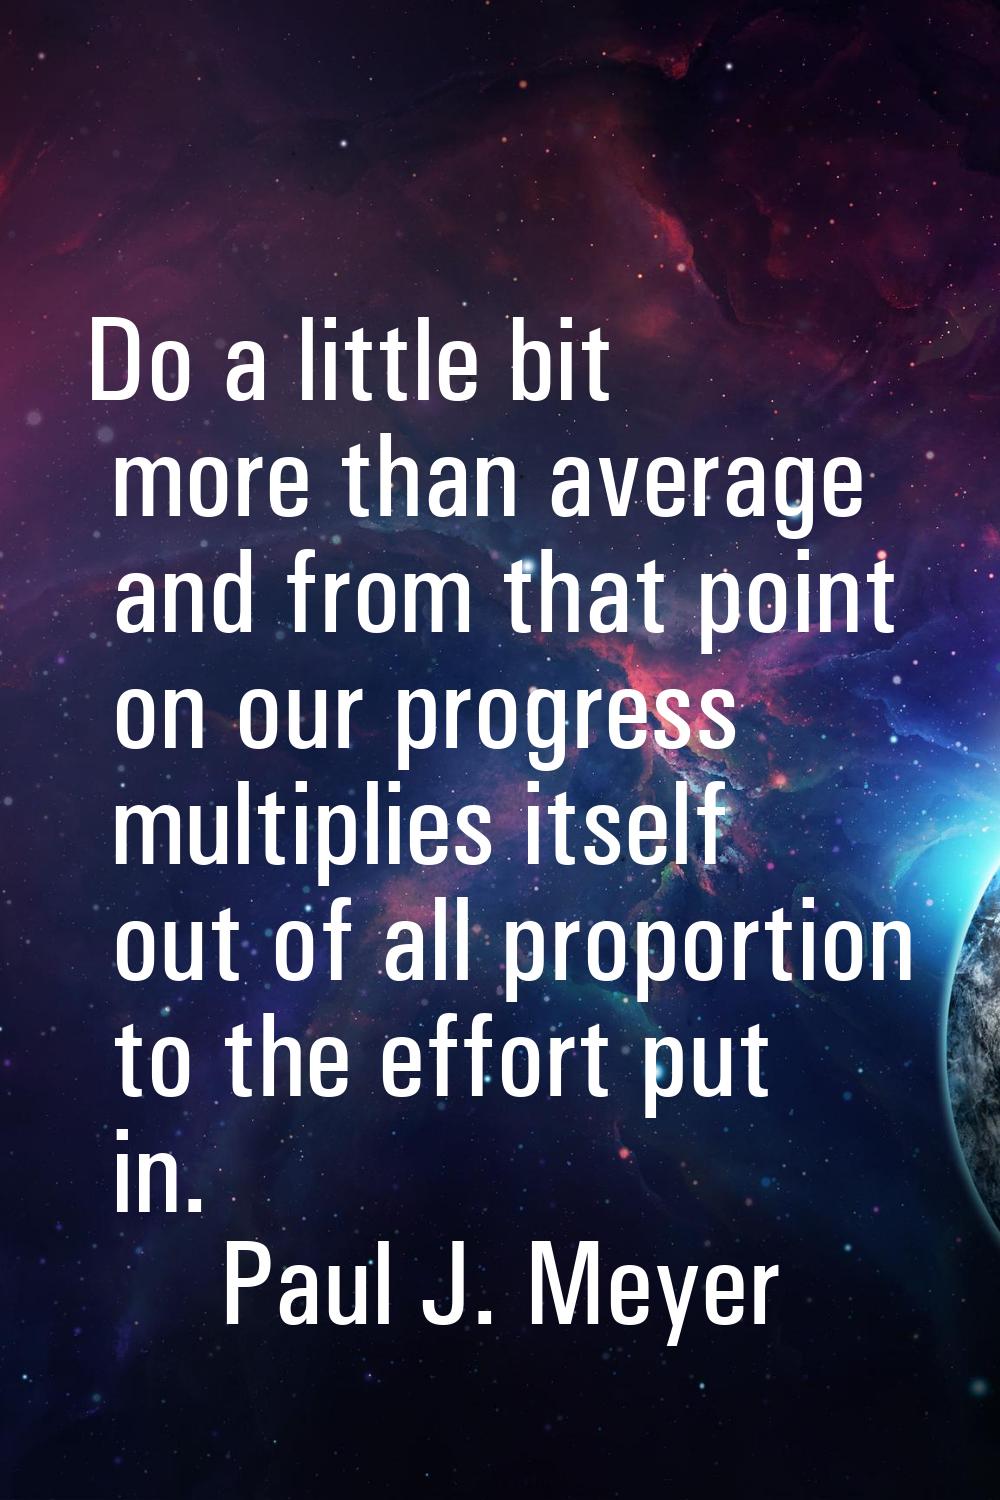 Do a little bit more than average and from that point on our progress multiplies itself out of all 